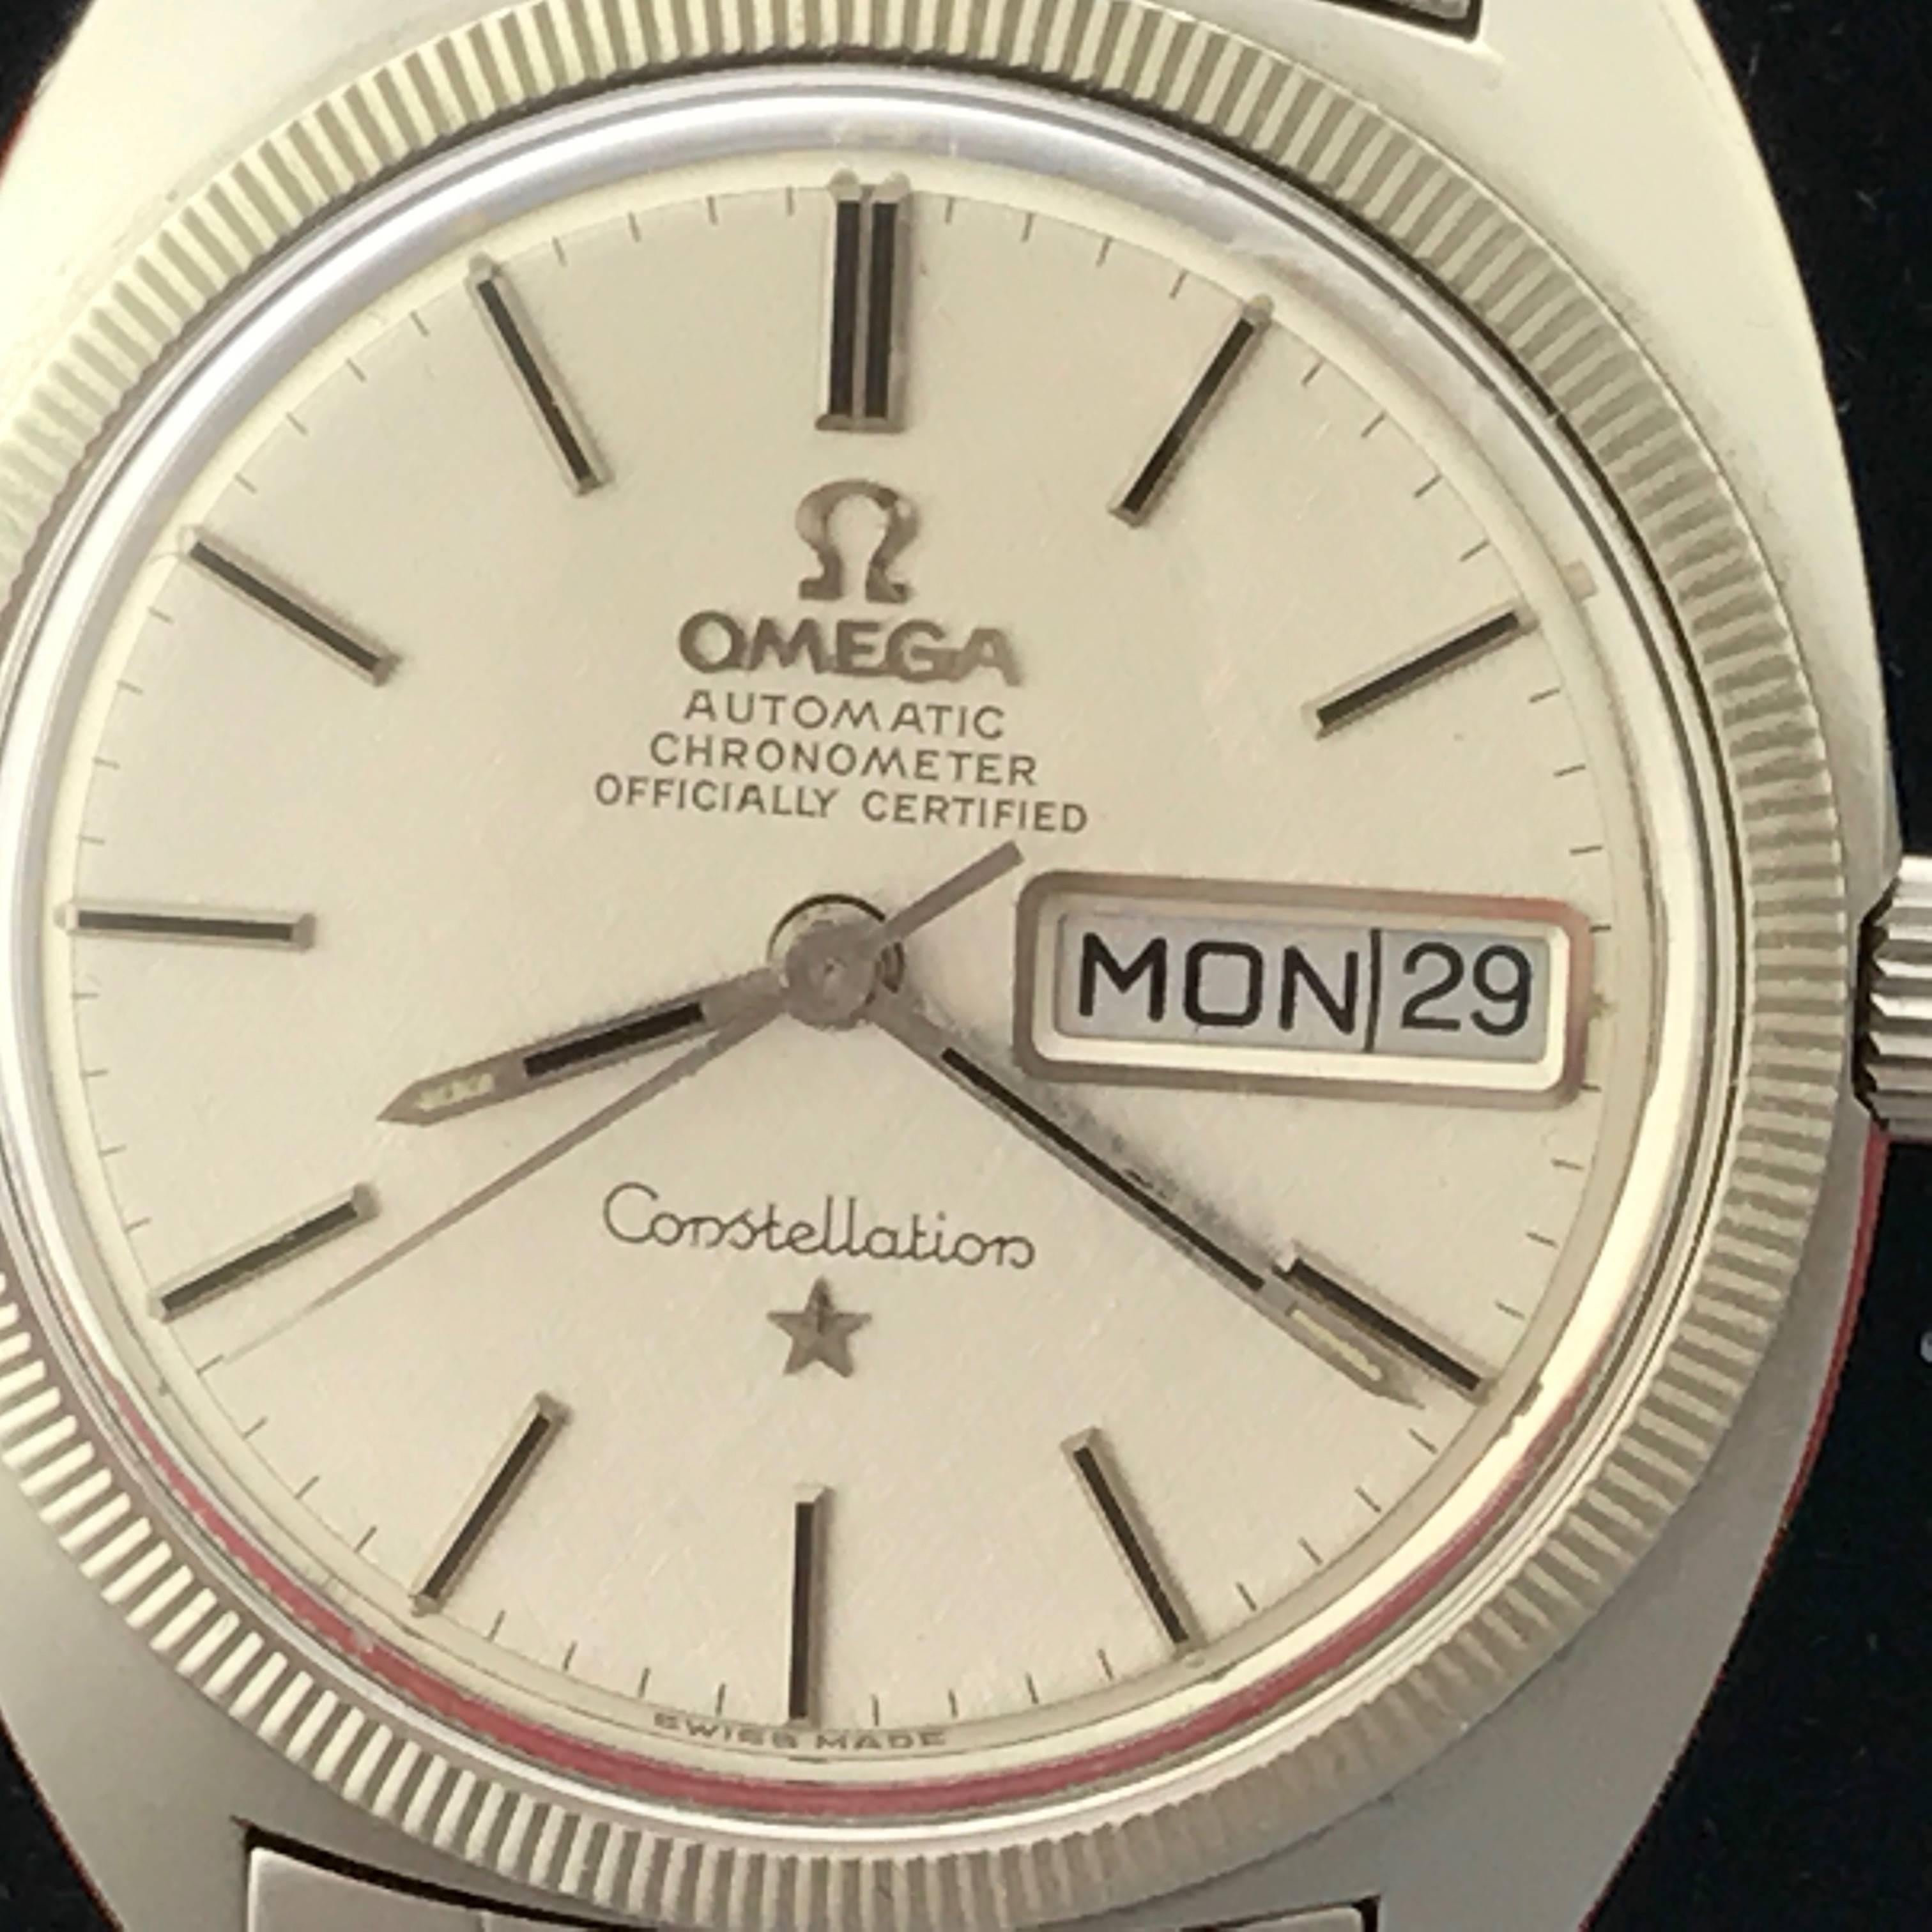 Omega Mens Constellation Vintage wristwatch. Automatic Winding with Day and Date. Silvered dial with polished hour markers. Stainless steel case with Observatory logo on back (35x 40mm). Stainless Steel Omega bracelet with fold-over Omega adjustable